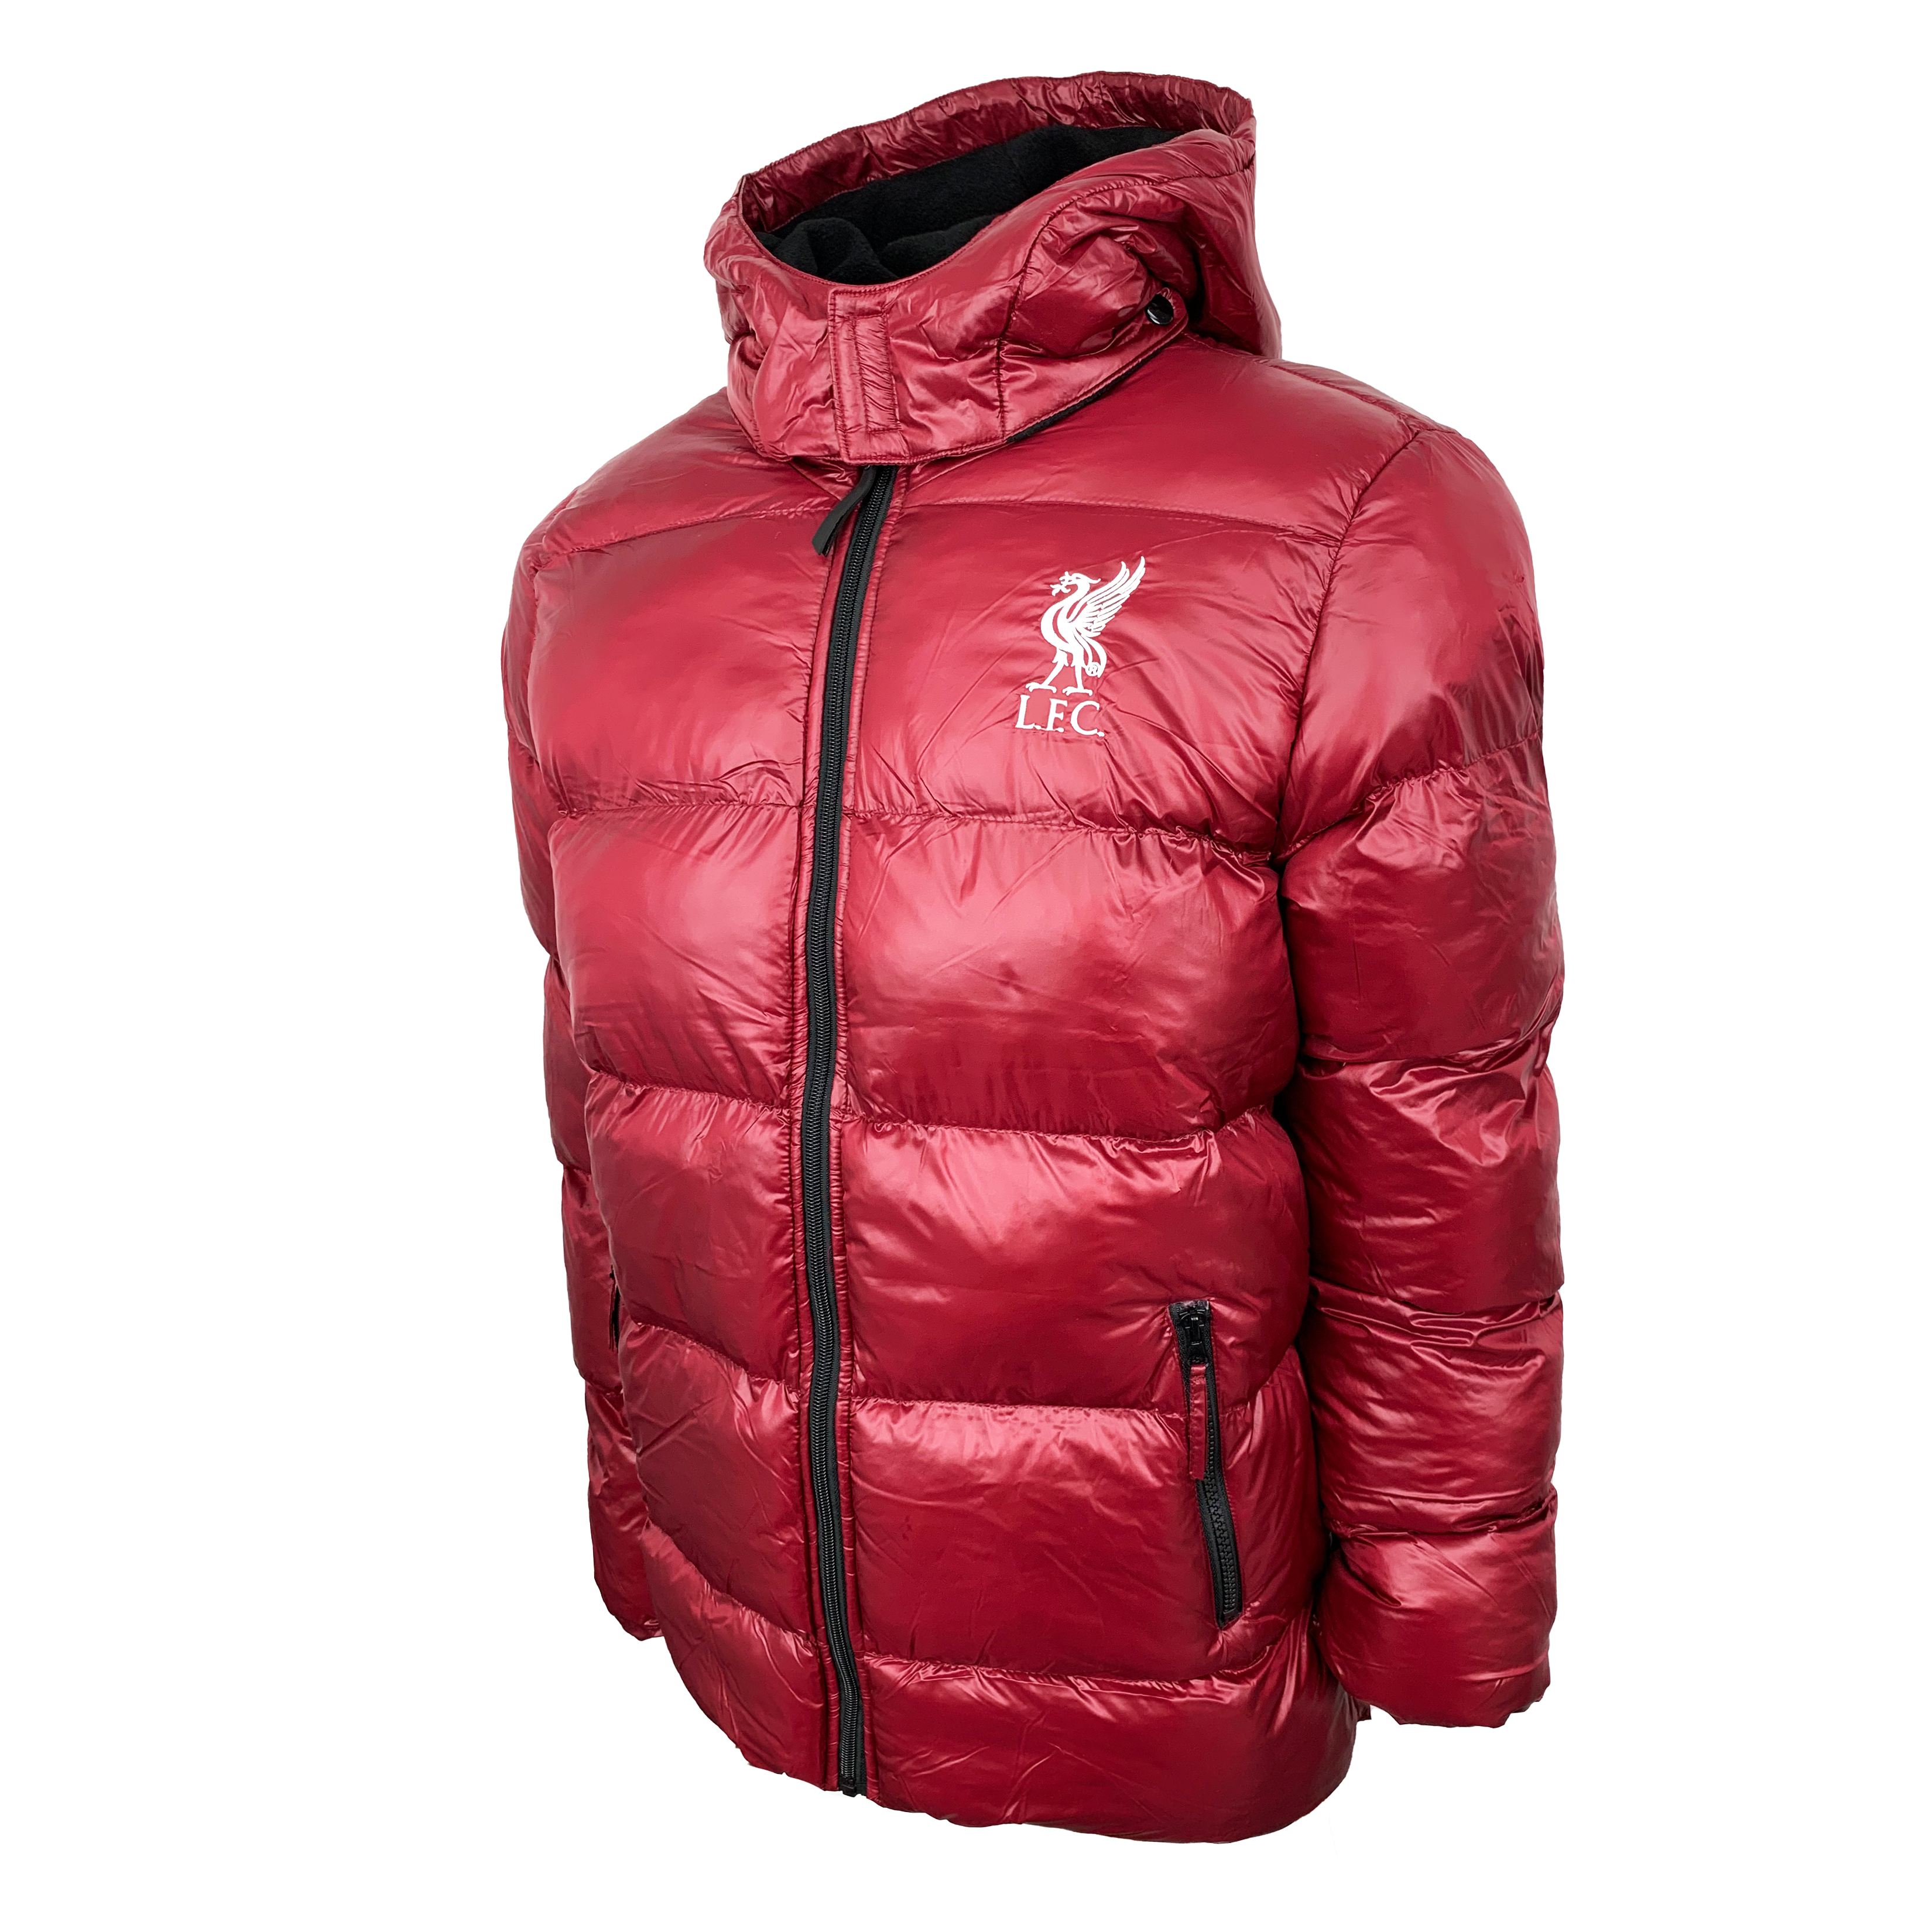 Liverpool Winter Jacket, With Removable Hood, Licensed Liverpool Puffer Jacket (YM) - image 1 of 4